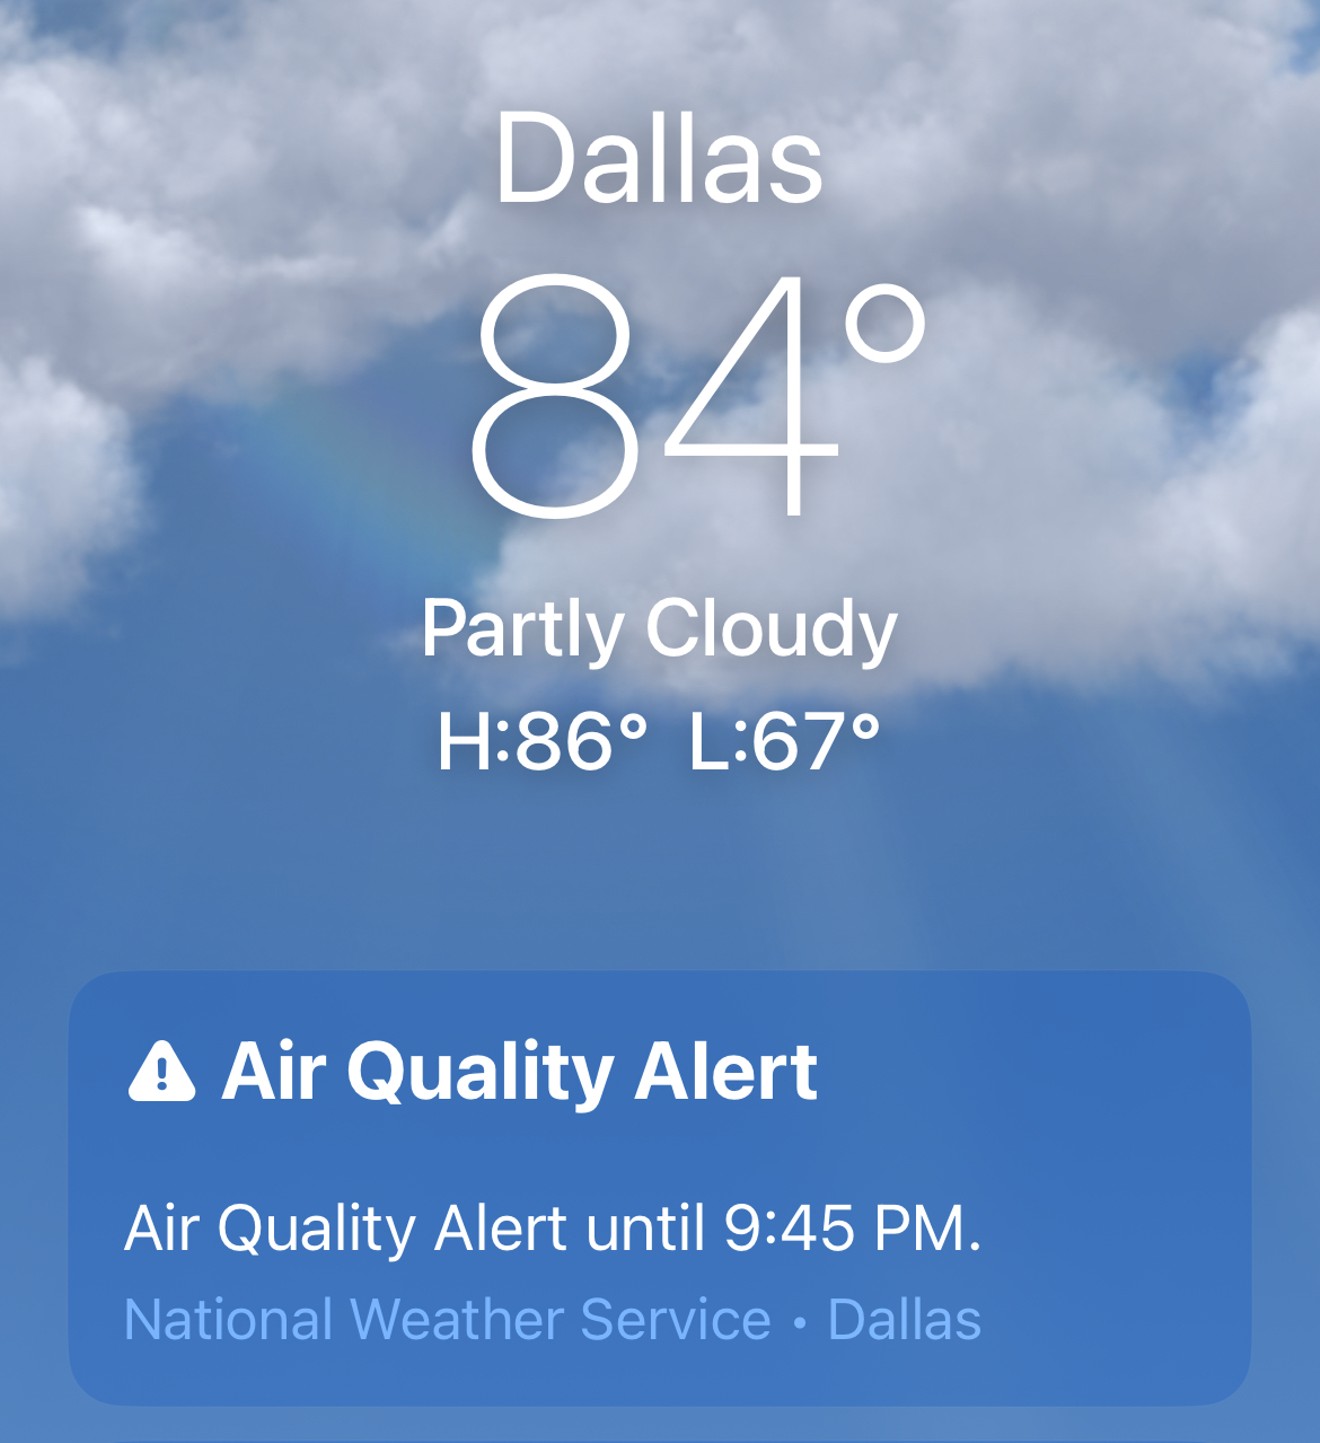 There's an official "Air Quality Alert" in Dallas until 9:45 p.m. Tuesday.